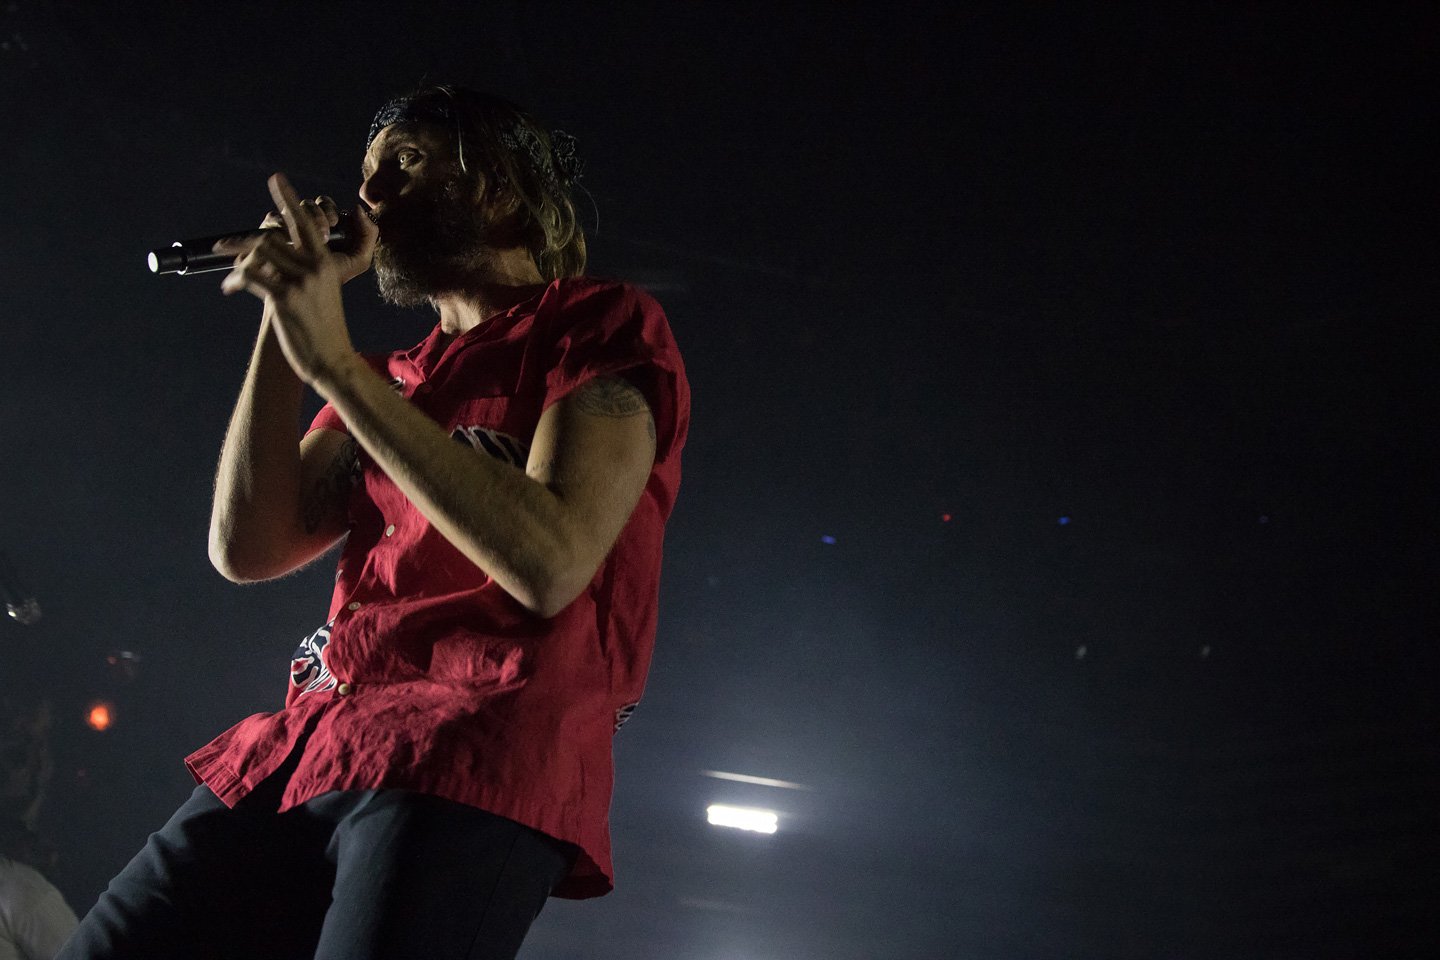 AWOLNATION and Nothing But Thieves at Fillmore Denver - 2018 Concert Photos